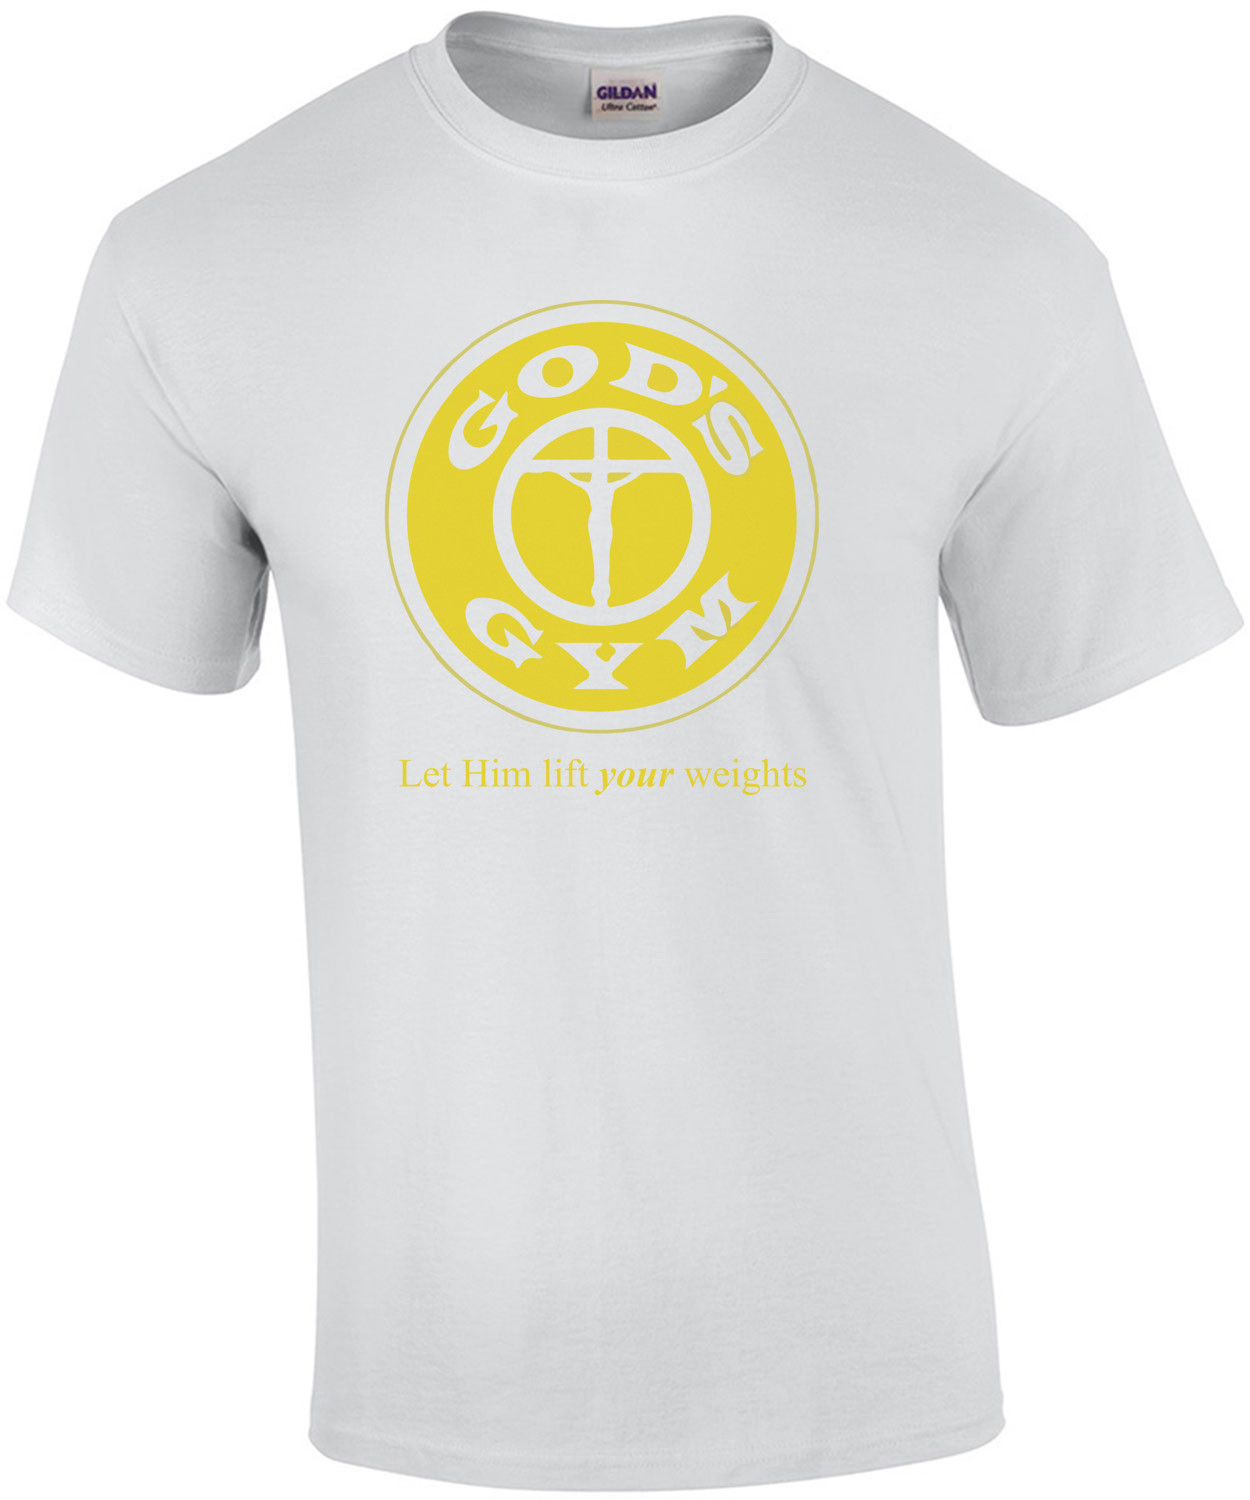 God's Gym - Let Him lift your weights T-Shirt